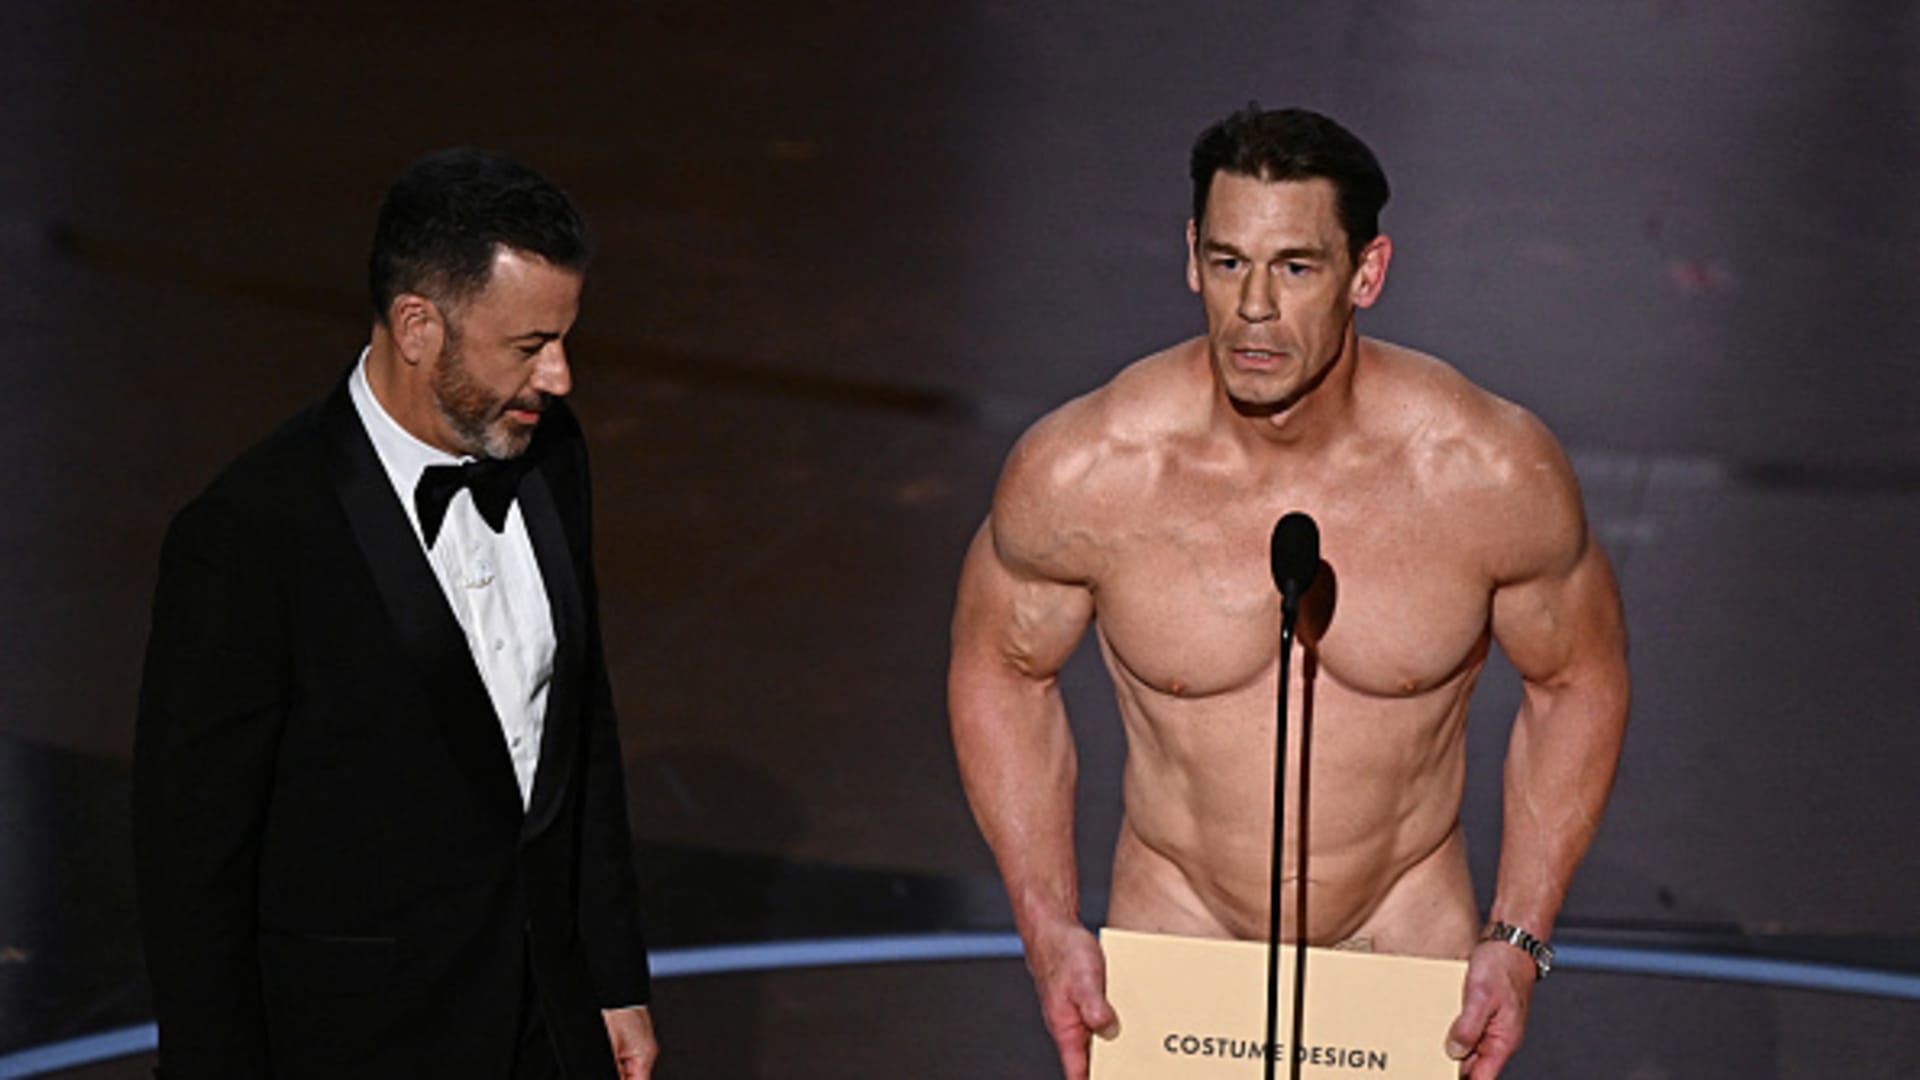 TV host Jimmy Kimmel (L) looks on as US actor John Cena (R) presents the award for Best Costume Design onstage during the 96th Annual Academy Awards at the Dolby Theatre in Hollywood, California on March 10, 2024.=